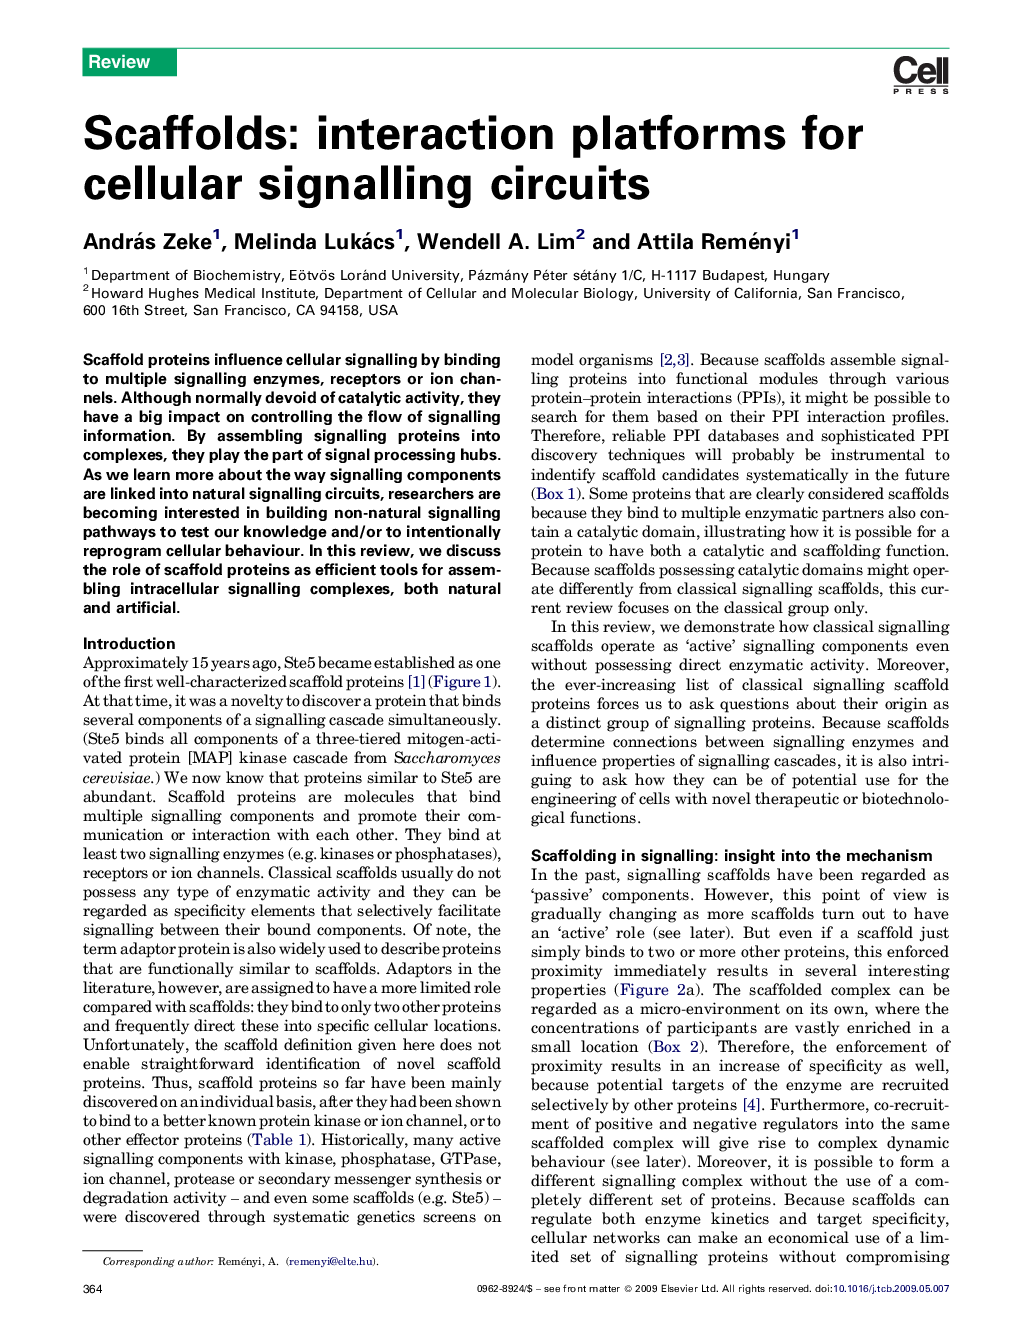 Scaffolds: interaction platforms for cellular signalling circuits